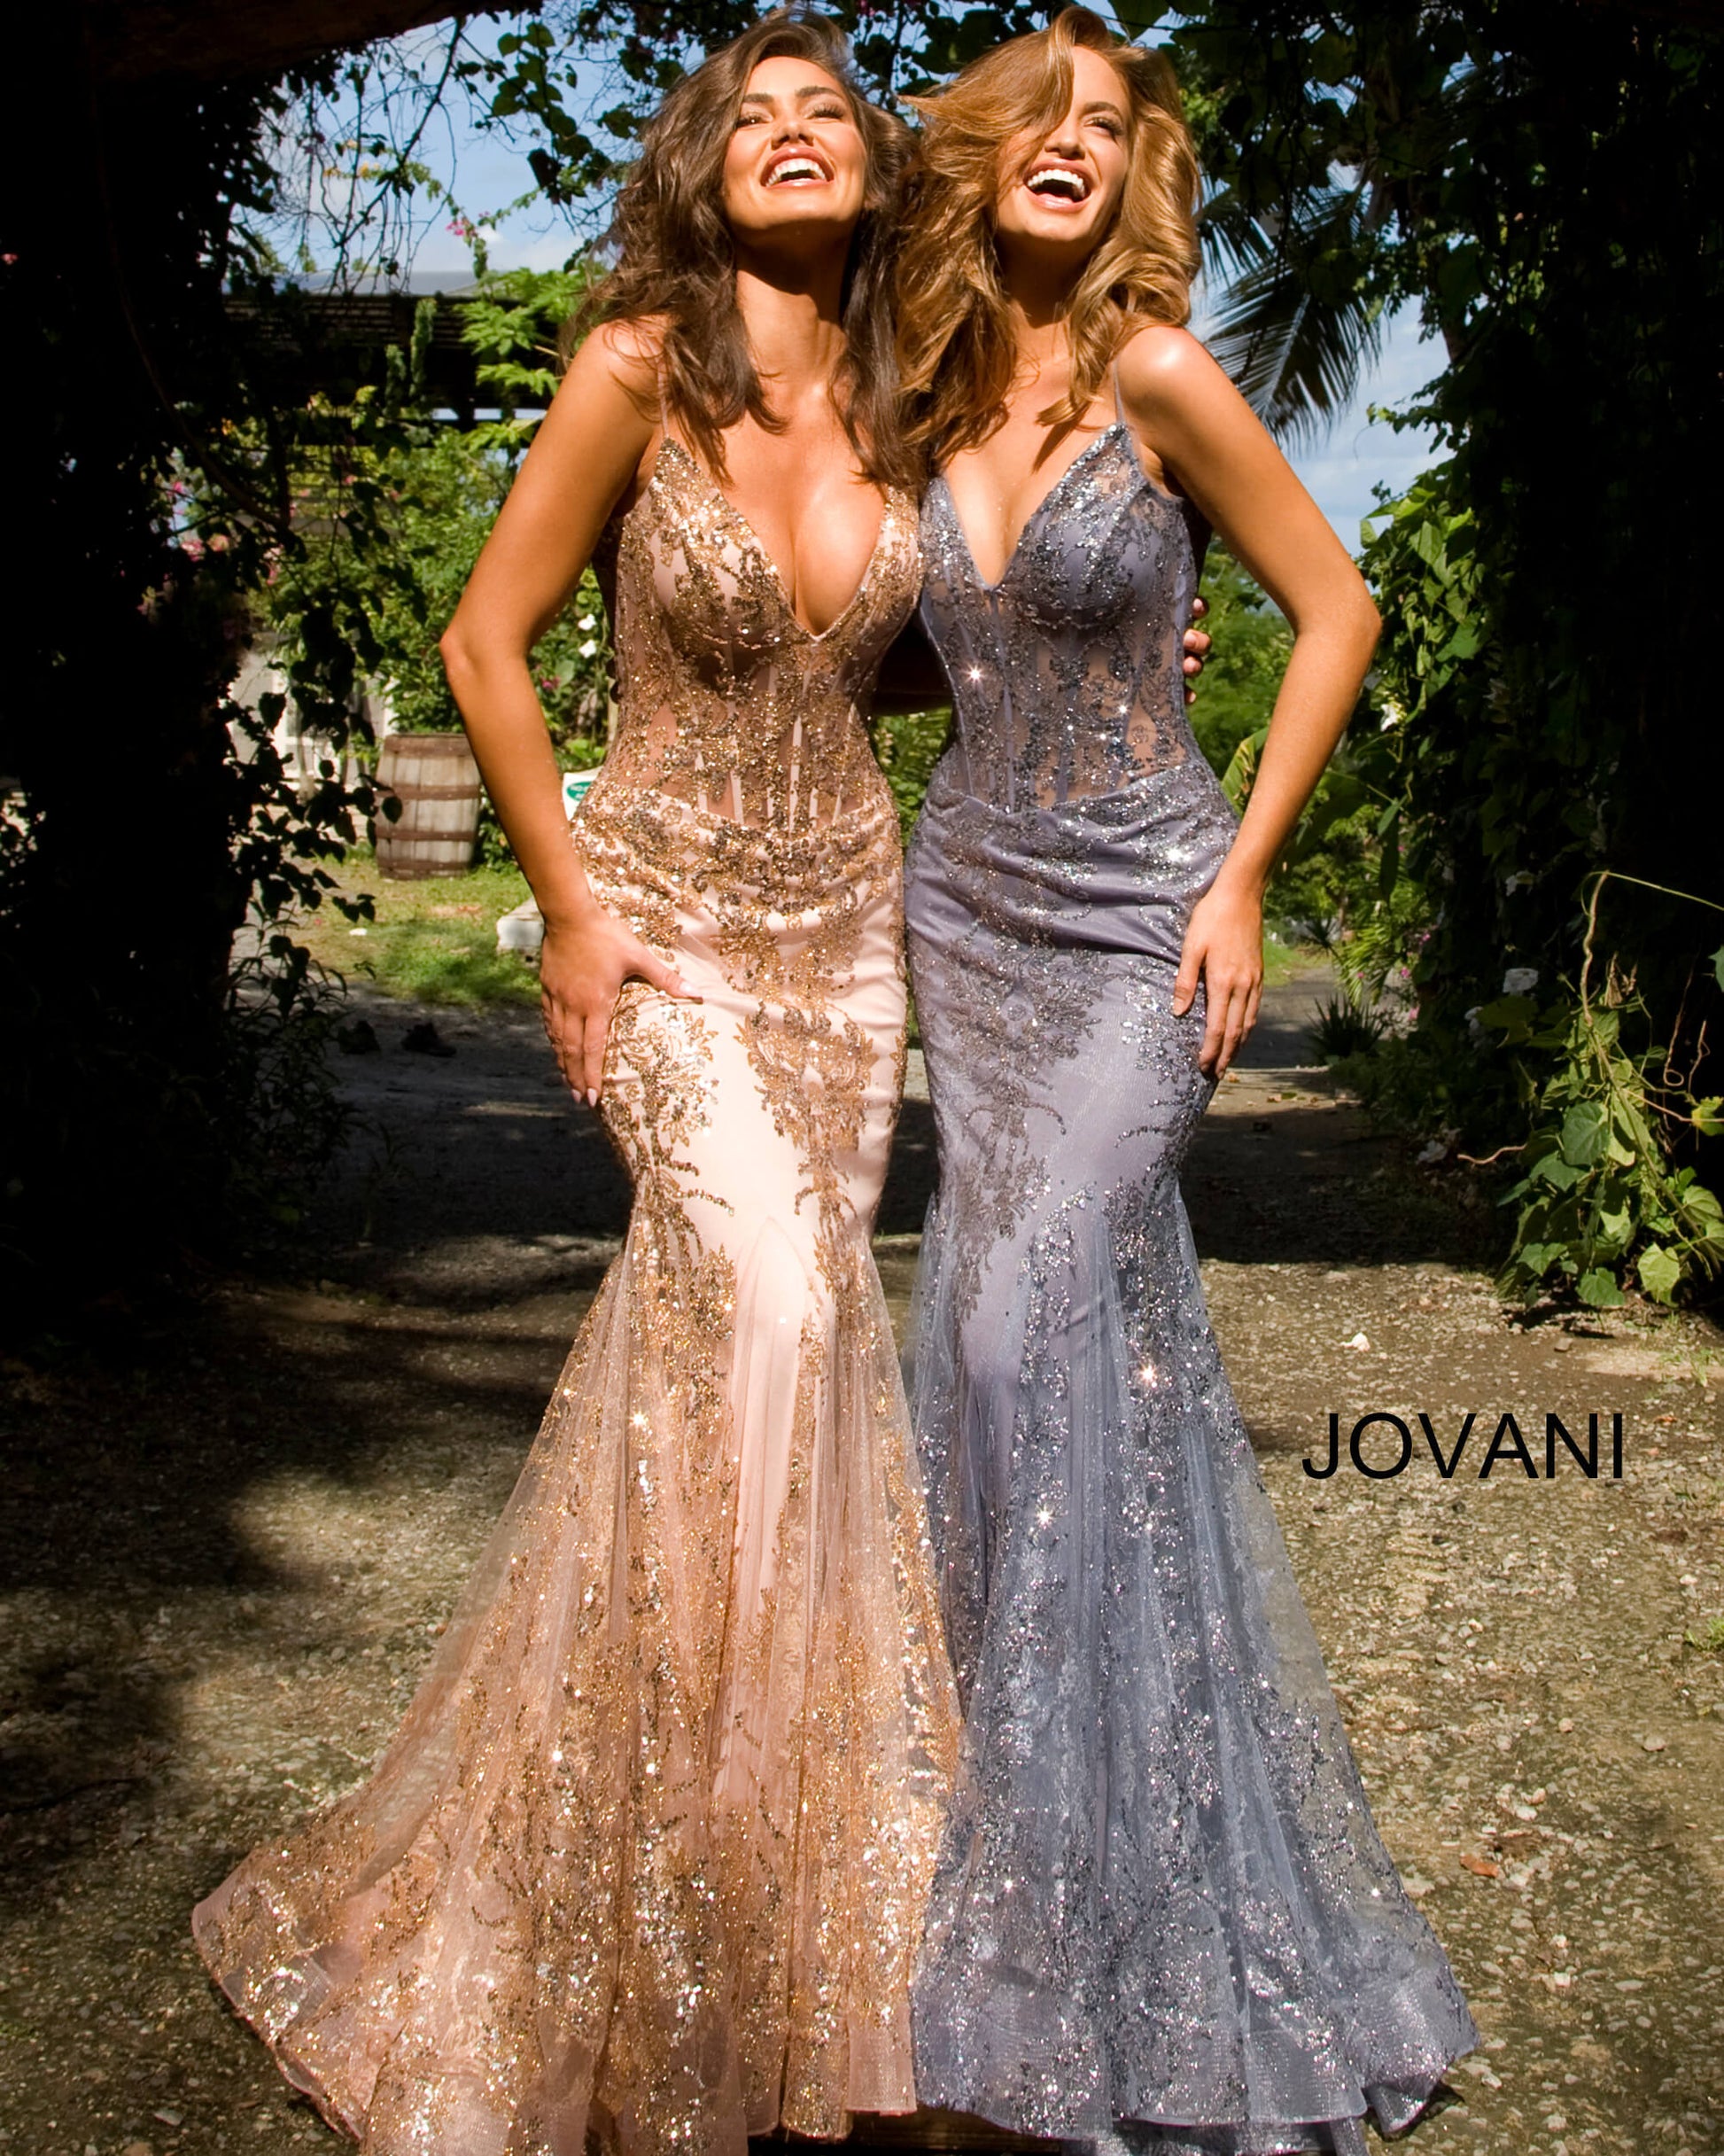 Jovani 3675 Long Prom Dress Sheer Corset Shimmer Mermaid Pageant Gown Embellished form fitting prom dress, floor length with slightly flare bottom, sheer bodice with boning, sleeveless, plunging neckline, spaghetti straps over shoulders, V back. Prom Dresses, Pink Prom Dresses, Corset Dresses, Illusion Dresses, Mermaid Prom Dresses, Sequin Prom Dresses, Sexy Prom Dresses, V Neck Prom Dresses, Long Prom Dresses, Blush Dresses Glass Slipper Formals